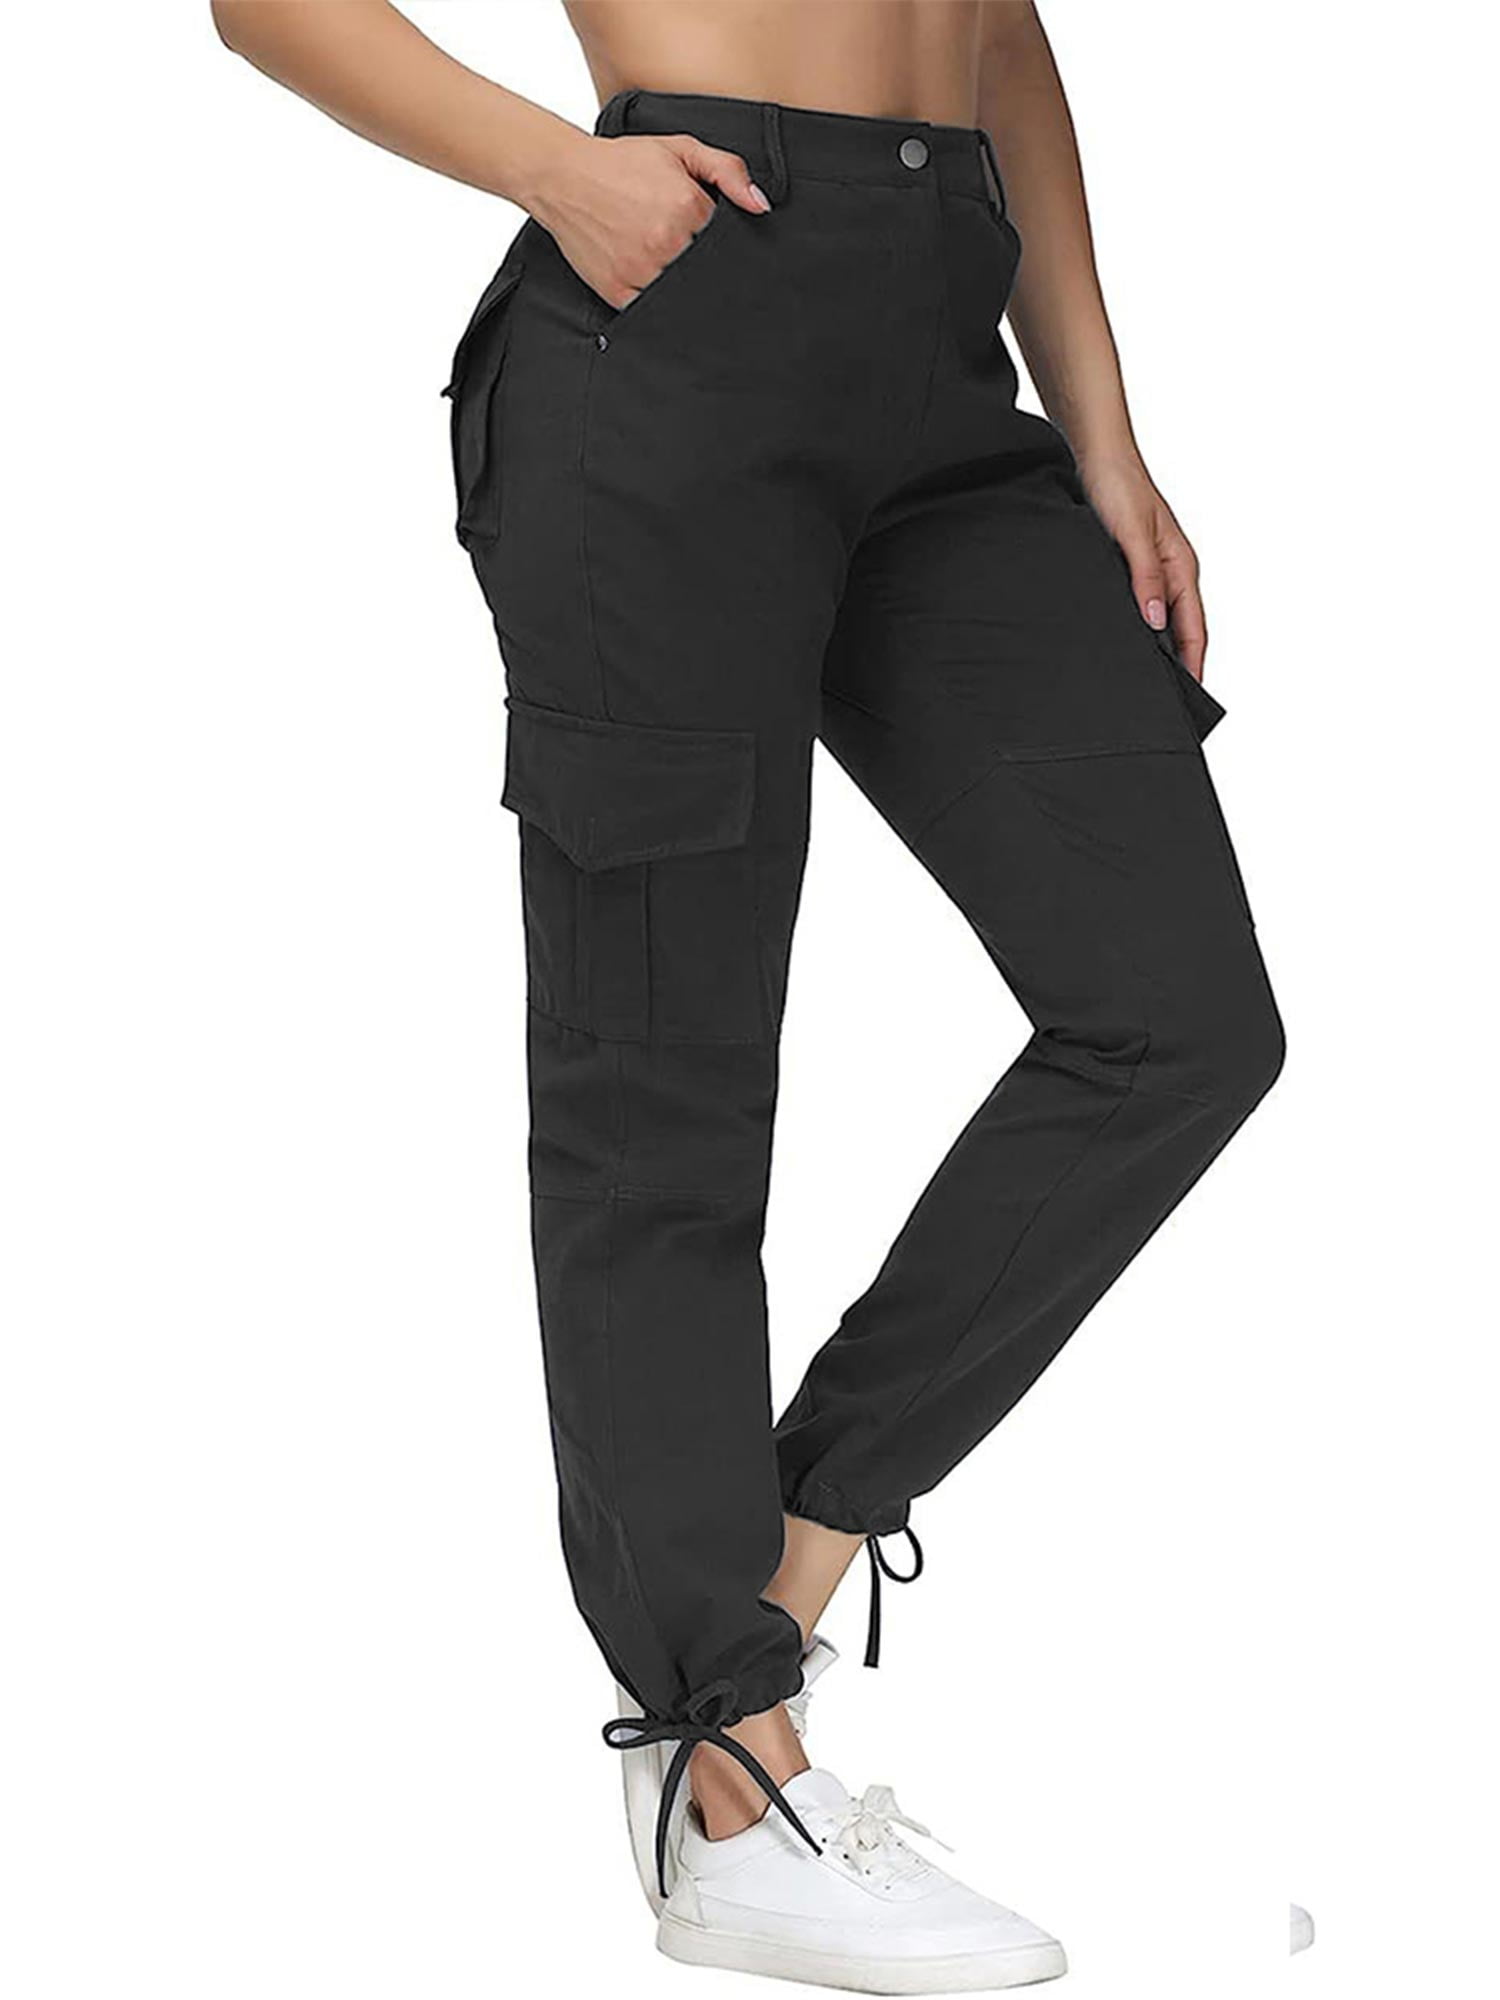 Keeccty Women Casual Pockets Trousers Elastic Cargo Pants